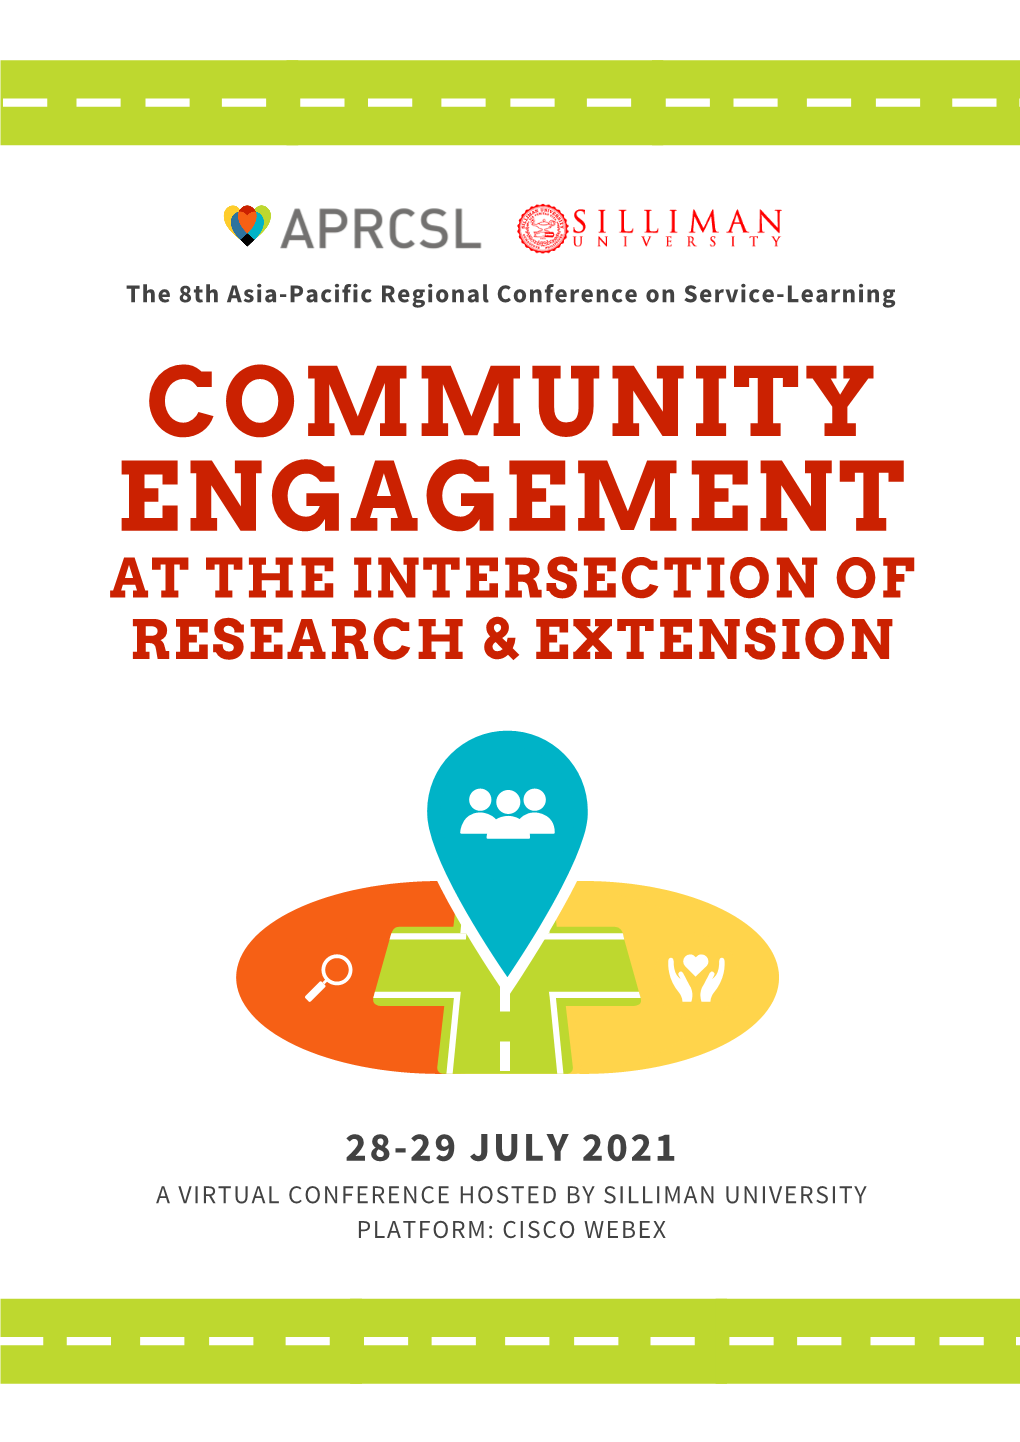 Community Engagement at the Intersection of Research & Extension